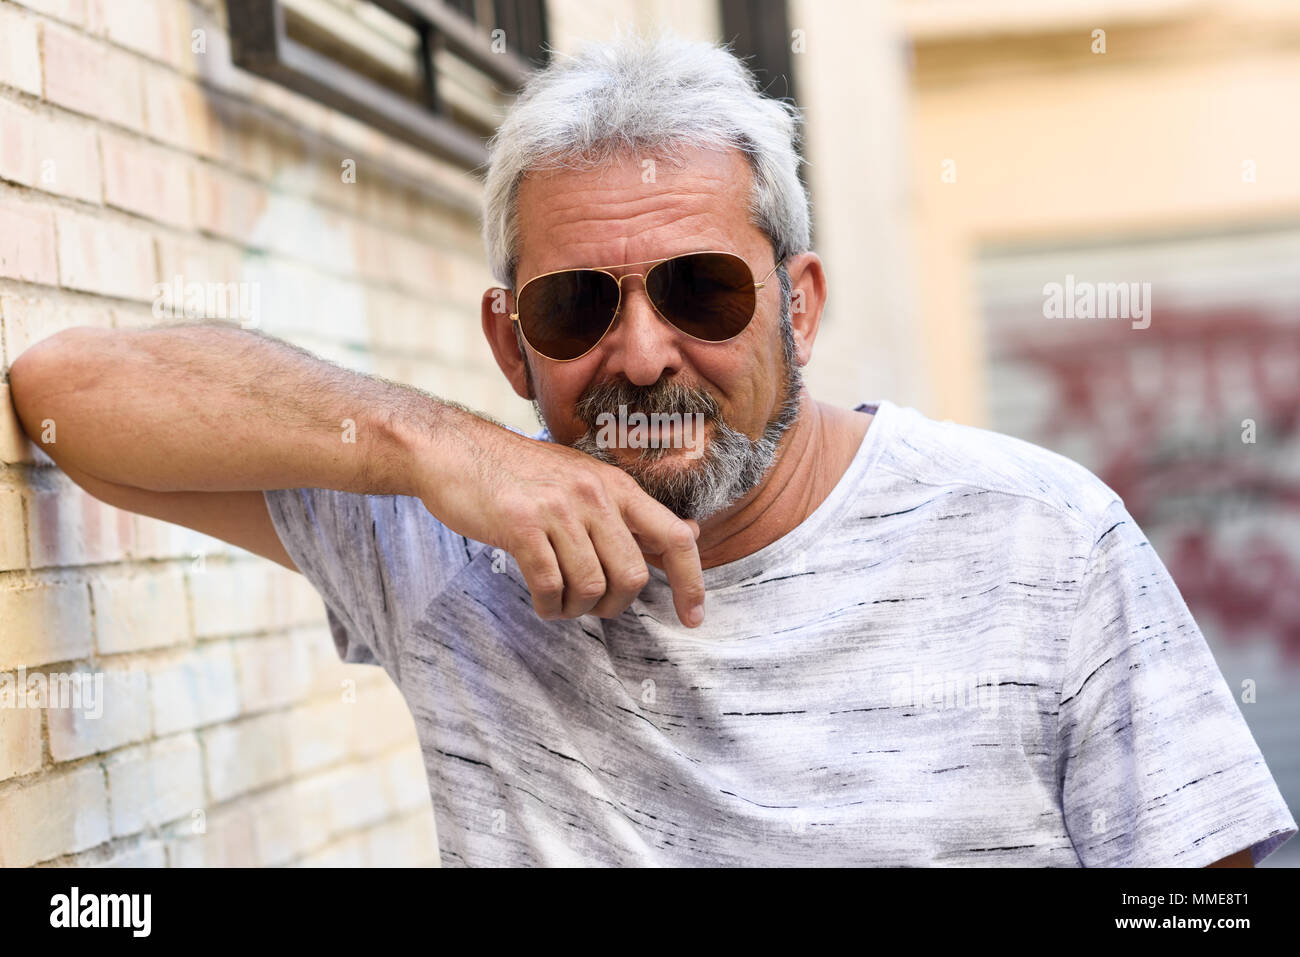 Mature man smiling at camera in urban background. Senior male with white  hair and beard wearing casual clothes and aviator sunglasses Stock Photo -  Alamy